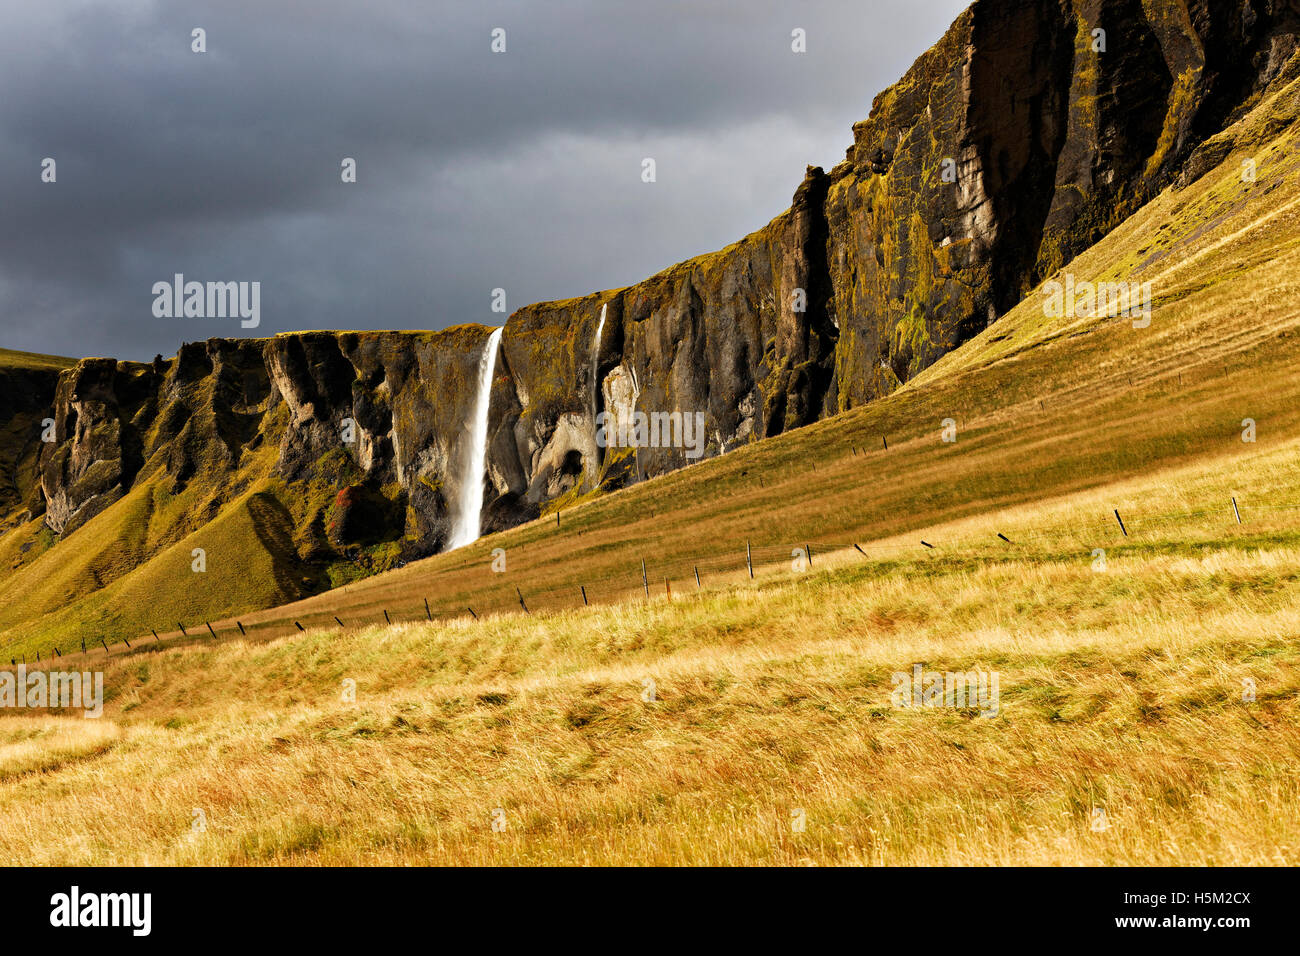 Mountain landscape (Dwarf Cliffs) with waterfall, South  East Iceland, North Atlantic, Europe Stock Photo